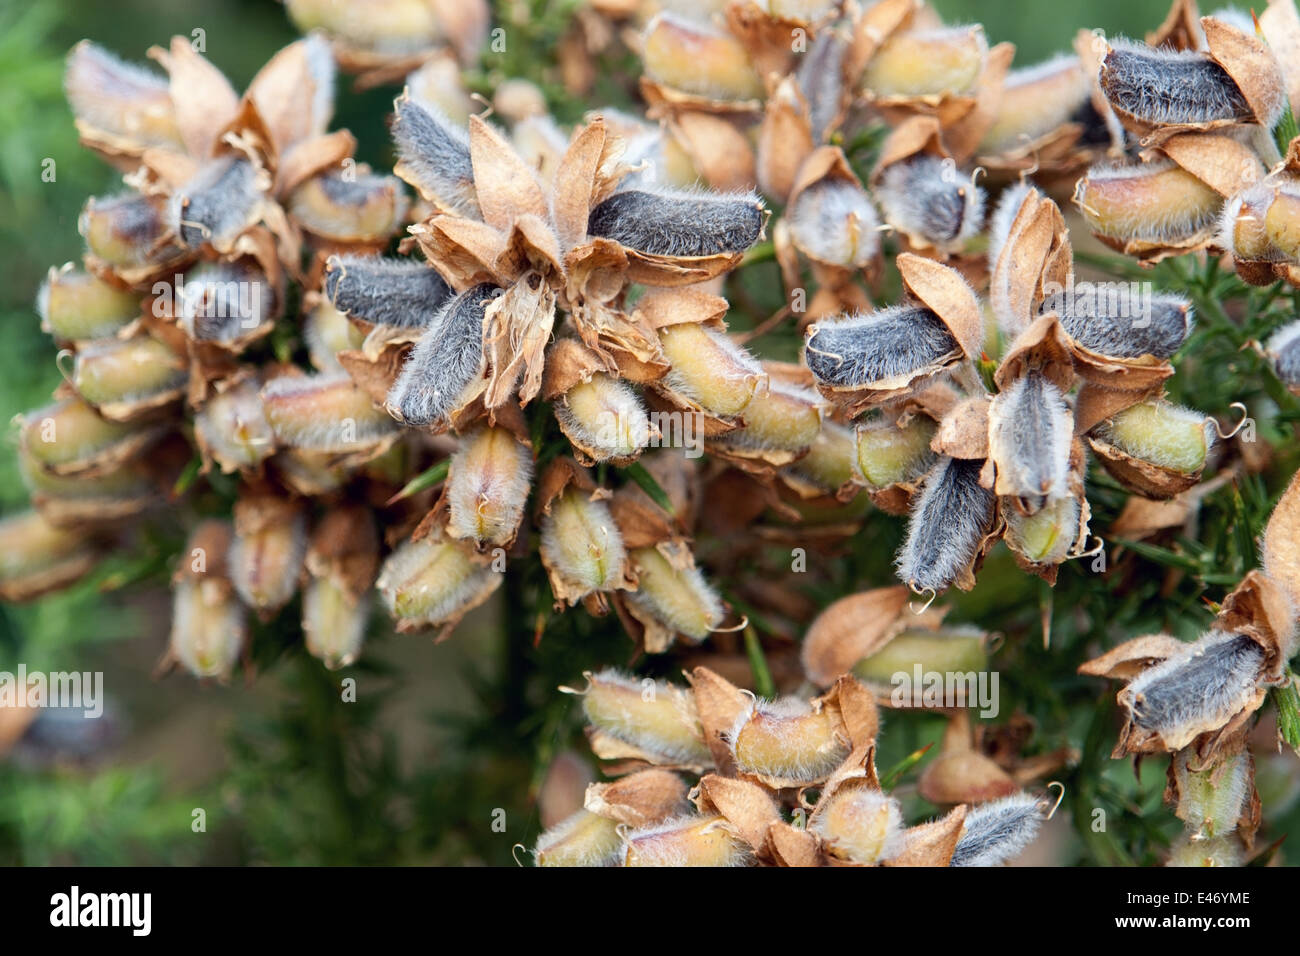 detail of a coniferous plant with seeds seen in Brittany, France Stock Photo